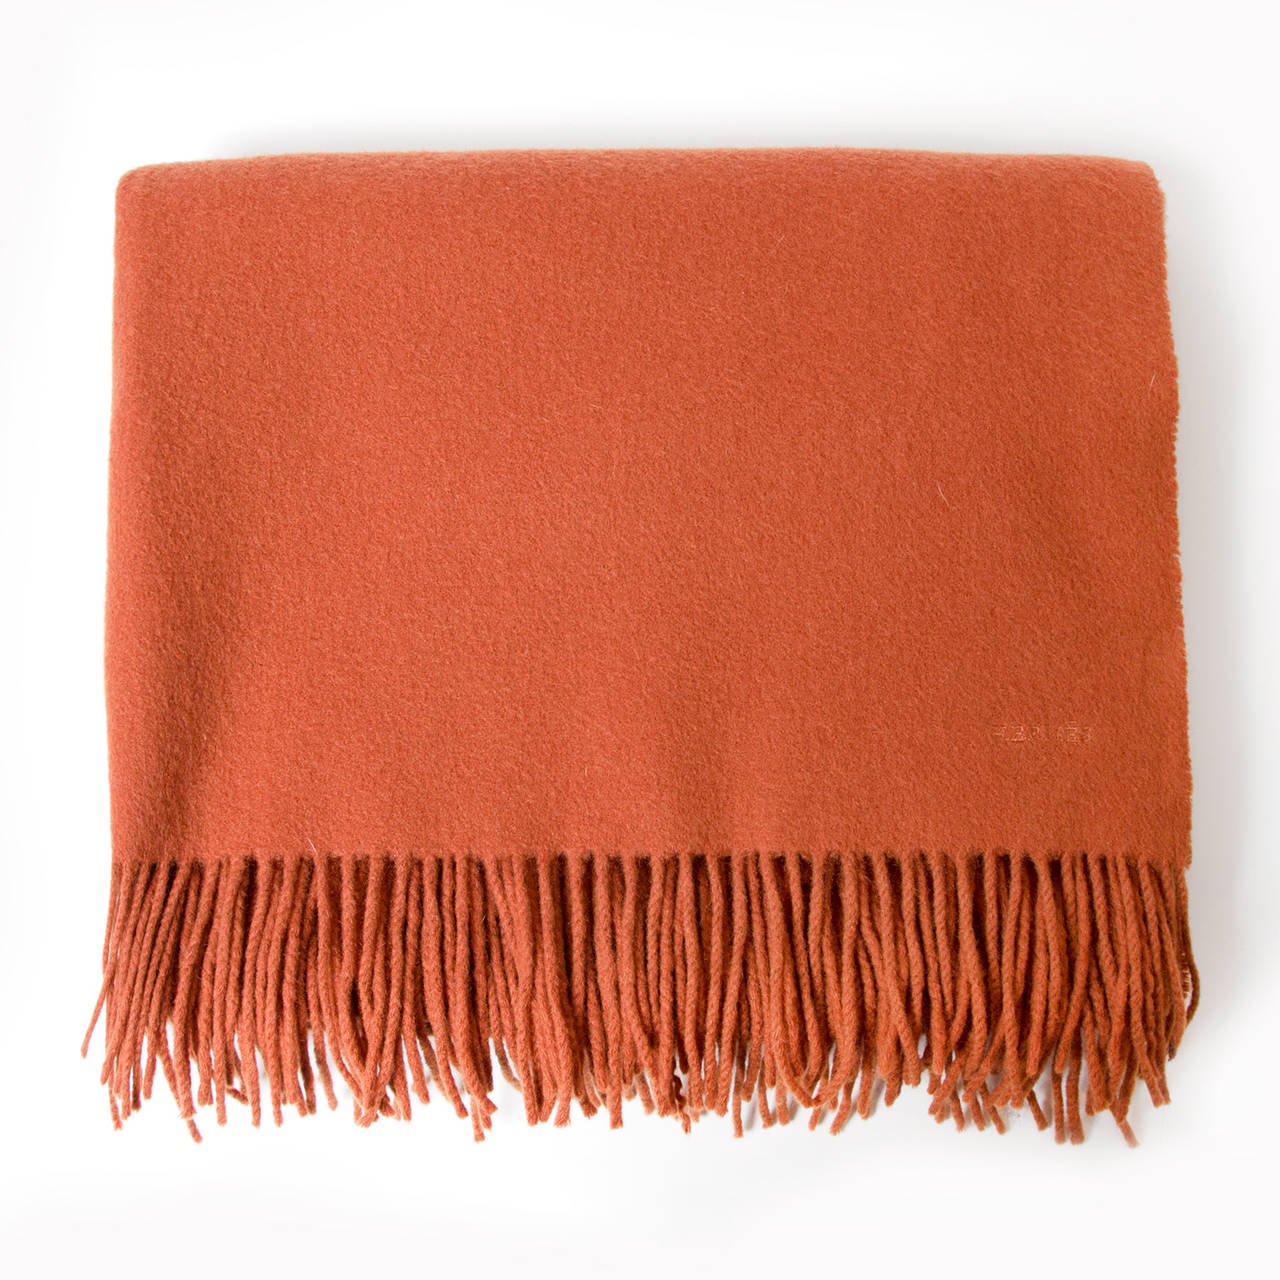 Hermès marge scarf or rectangle plaid in cashmere blend (cashmere 70% / Wool 30%). 
Color: rust